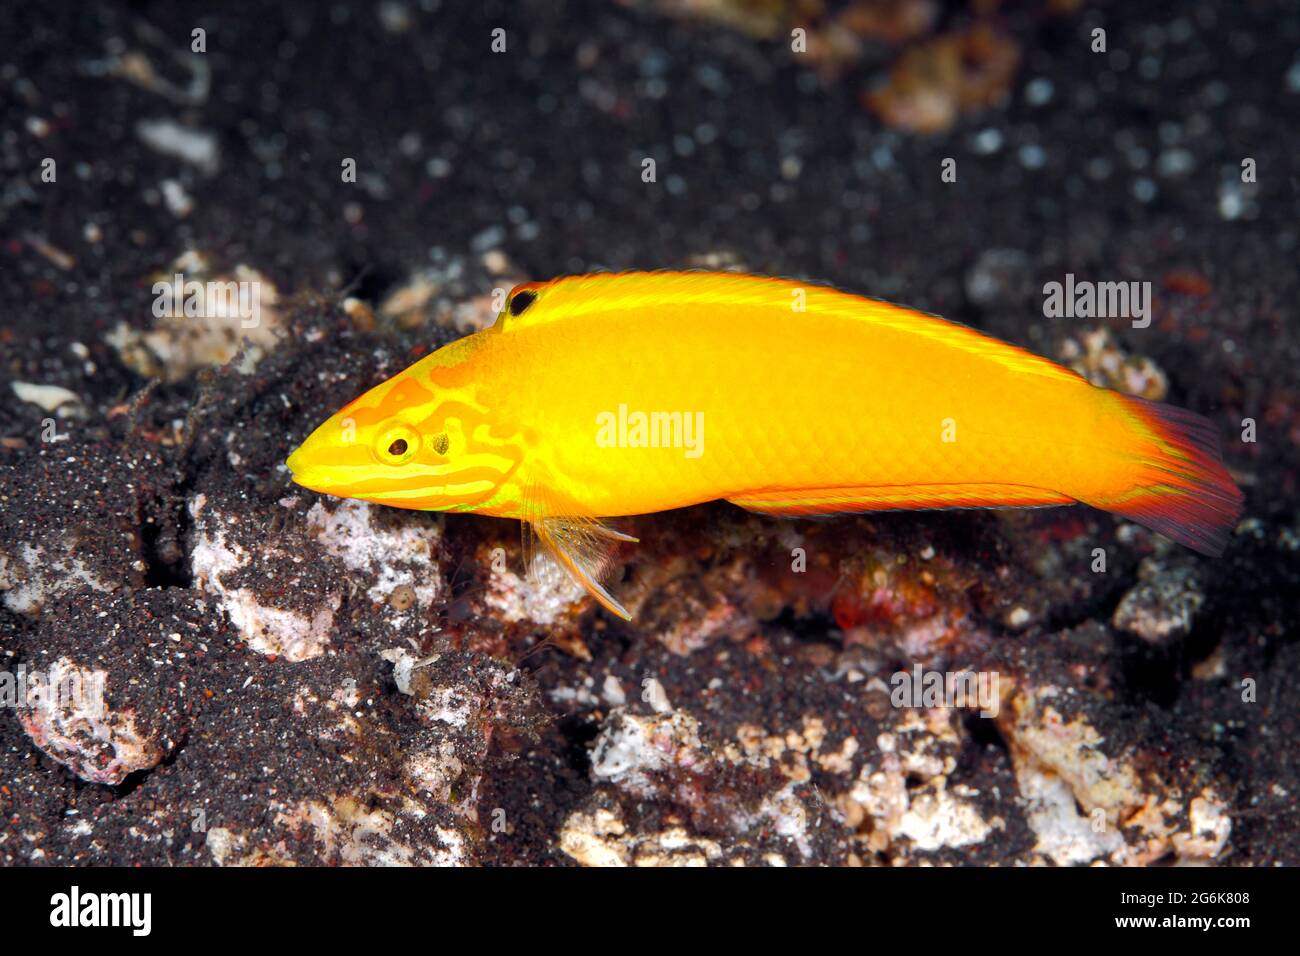 Canary Wrasse, Halichoeres chrysus. Also known as Golden Wrasse or Yellow Wrasse.Tulamben, Bali, Indonesia. Bali Sea, Indian Ocean Stock Photo